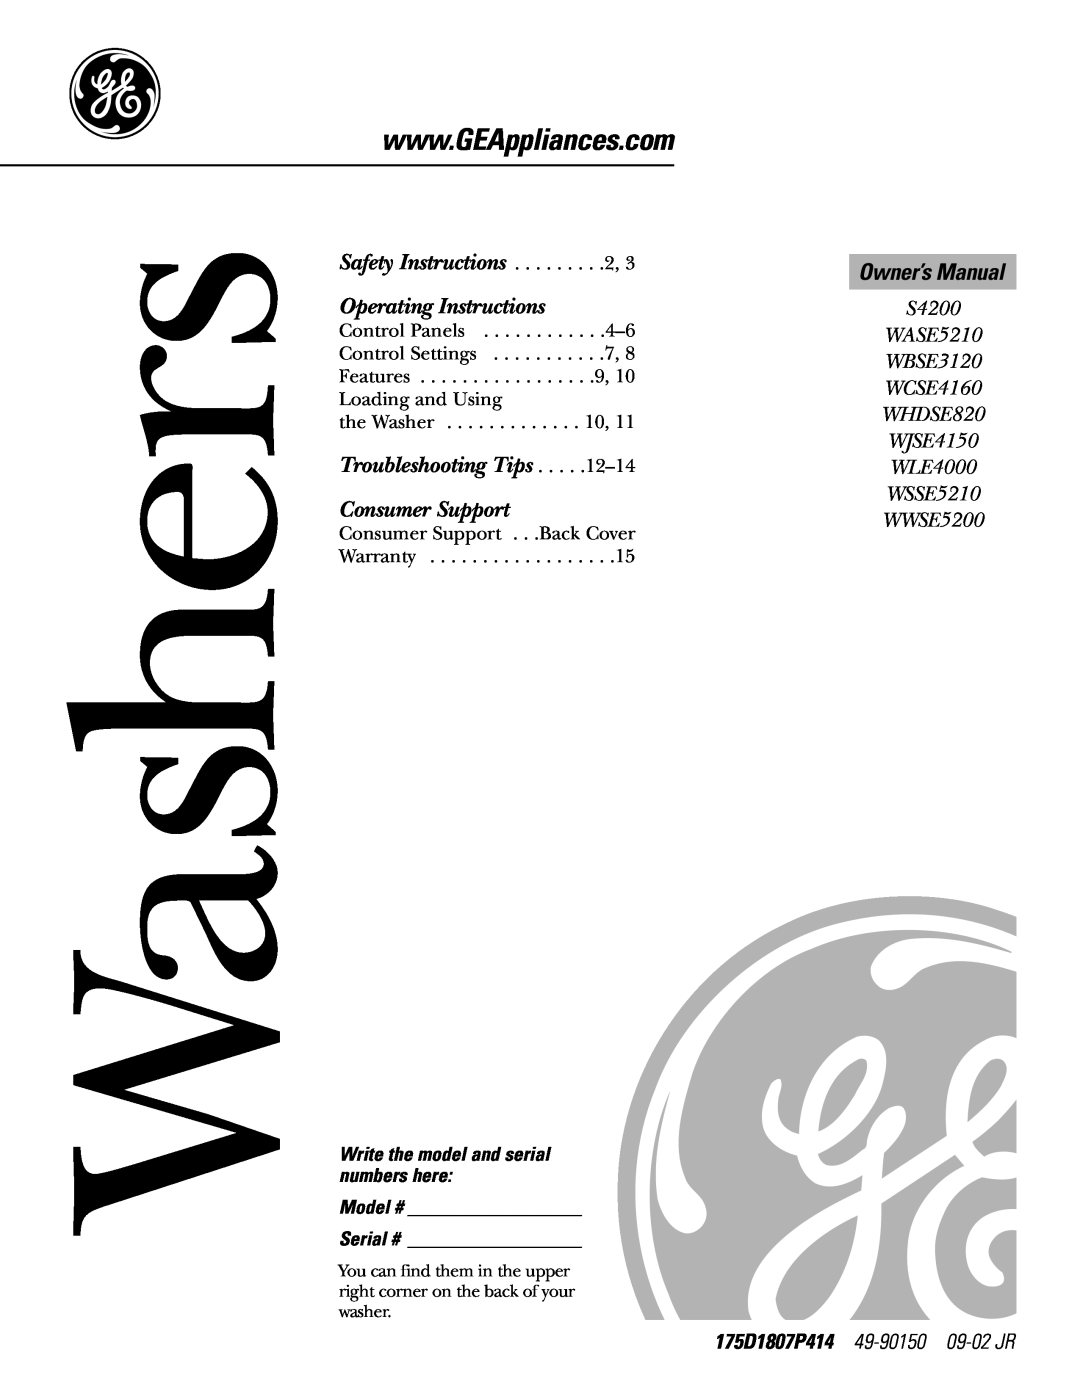 GE WASE5210, WLE4000, S4200 owner manual 175D1807P393 49-90130 03-02JR, Washers, Operating Instructions, Consumer Support 